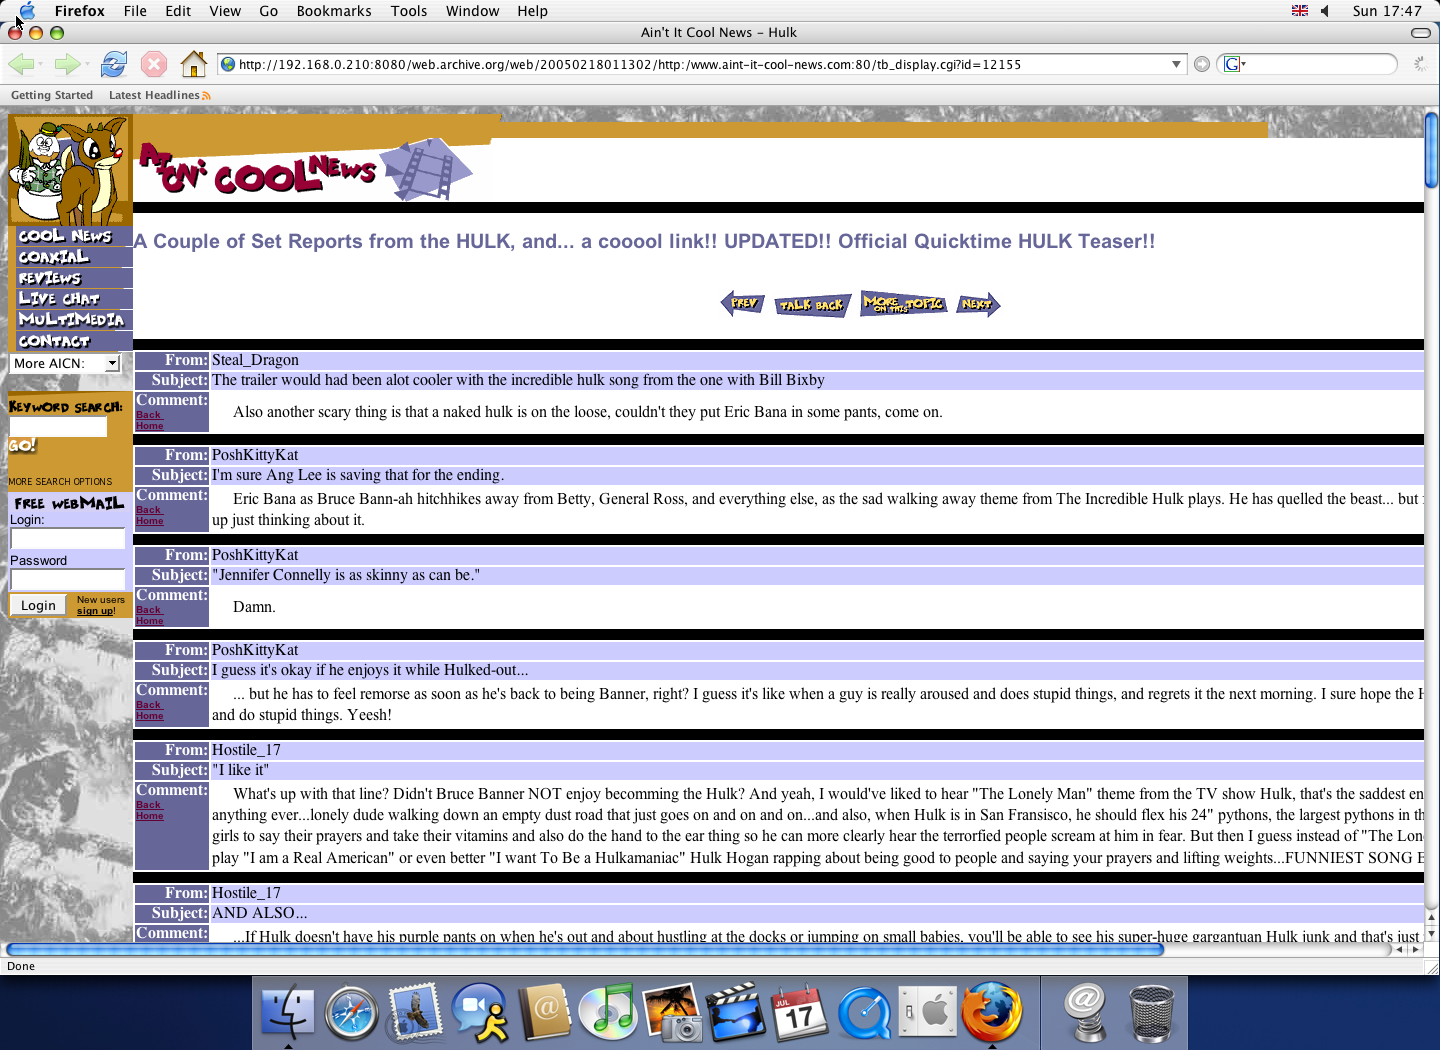 OS X 10.3 PPC with Mozilla Firefox 1.0 displaying a page from Ain't it Cool News archived at February 18, 2005 at 01:13:02